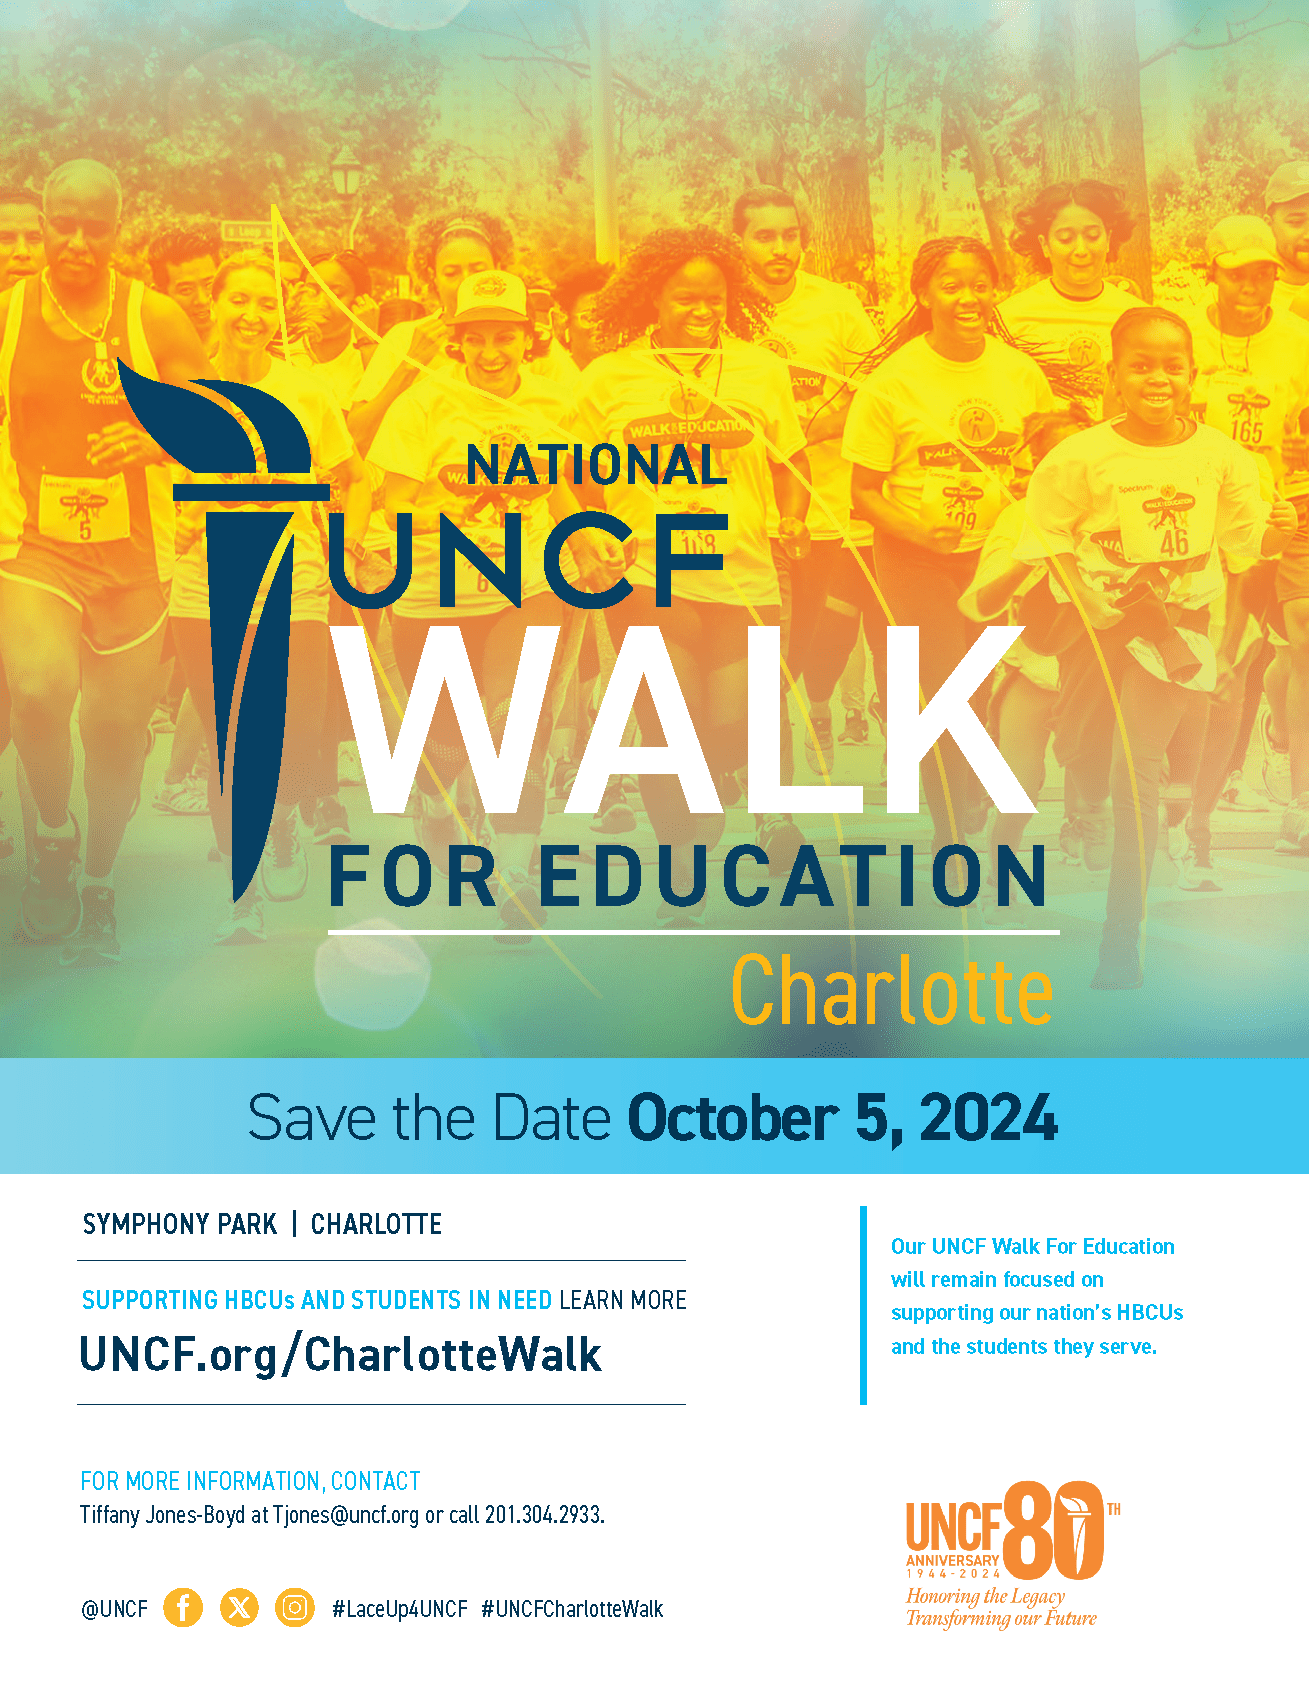 National UNCF Walk For Education Charlotte| Save the Date October 5,2024| Symphony Park|Charlotte| Supporting HBCUs and Students in Need Learn More| UNCF.org/CharlotteWalk| For More Information Contact Tiffany Jones-Boyd at TJONES@UNCF.ORG or call 201.304.2933| Our UNCF Walk For Education will remain focused on supporting our nation's HBCUs and the students they serve